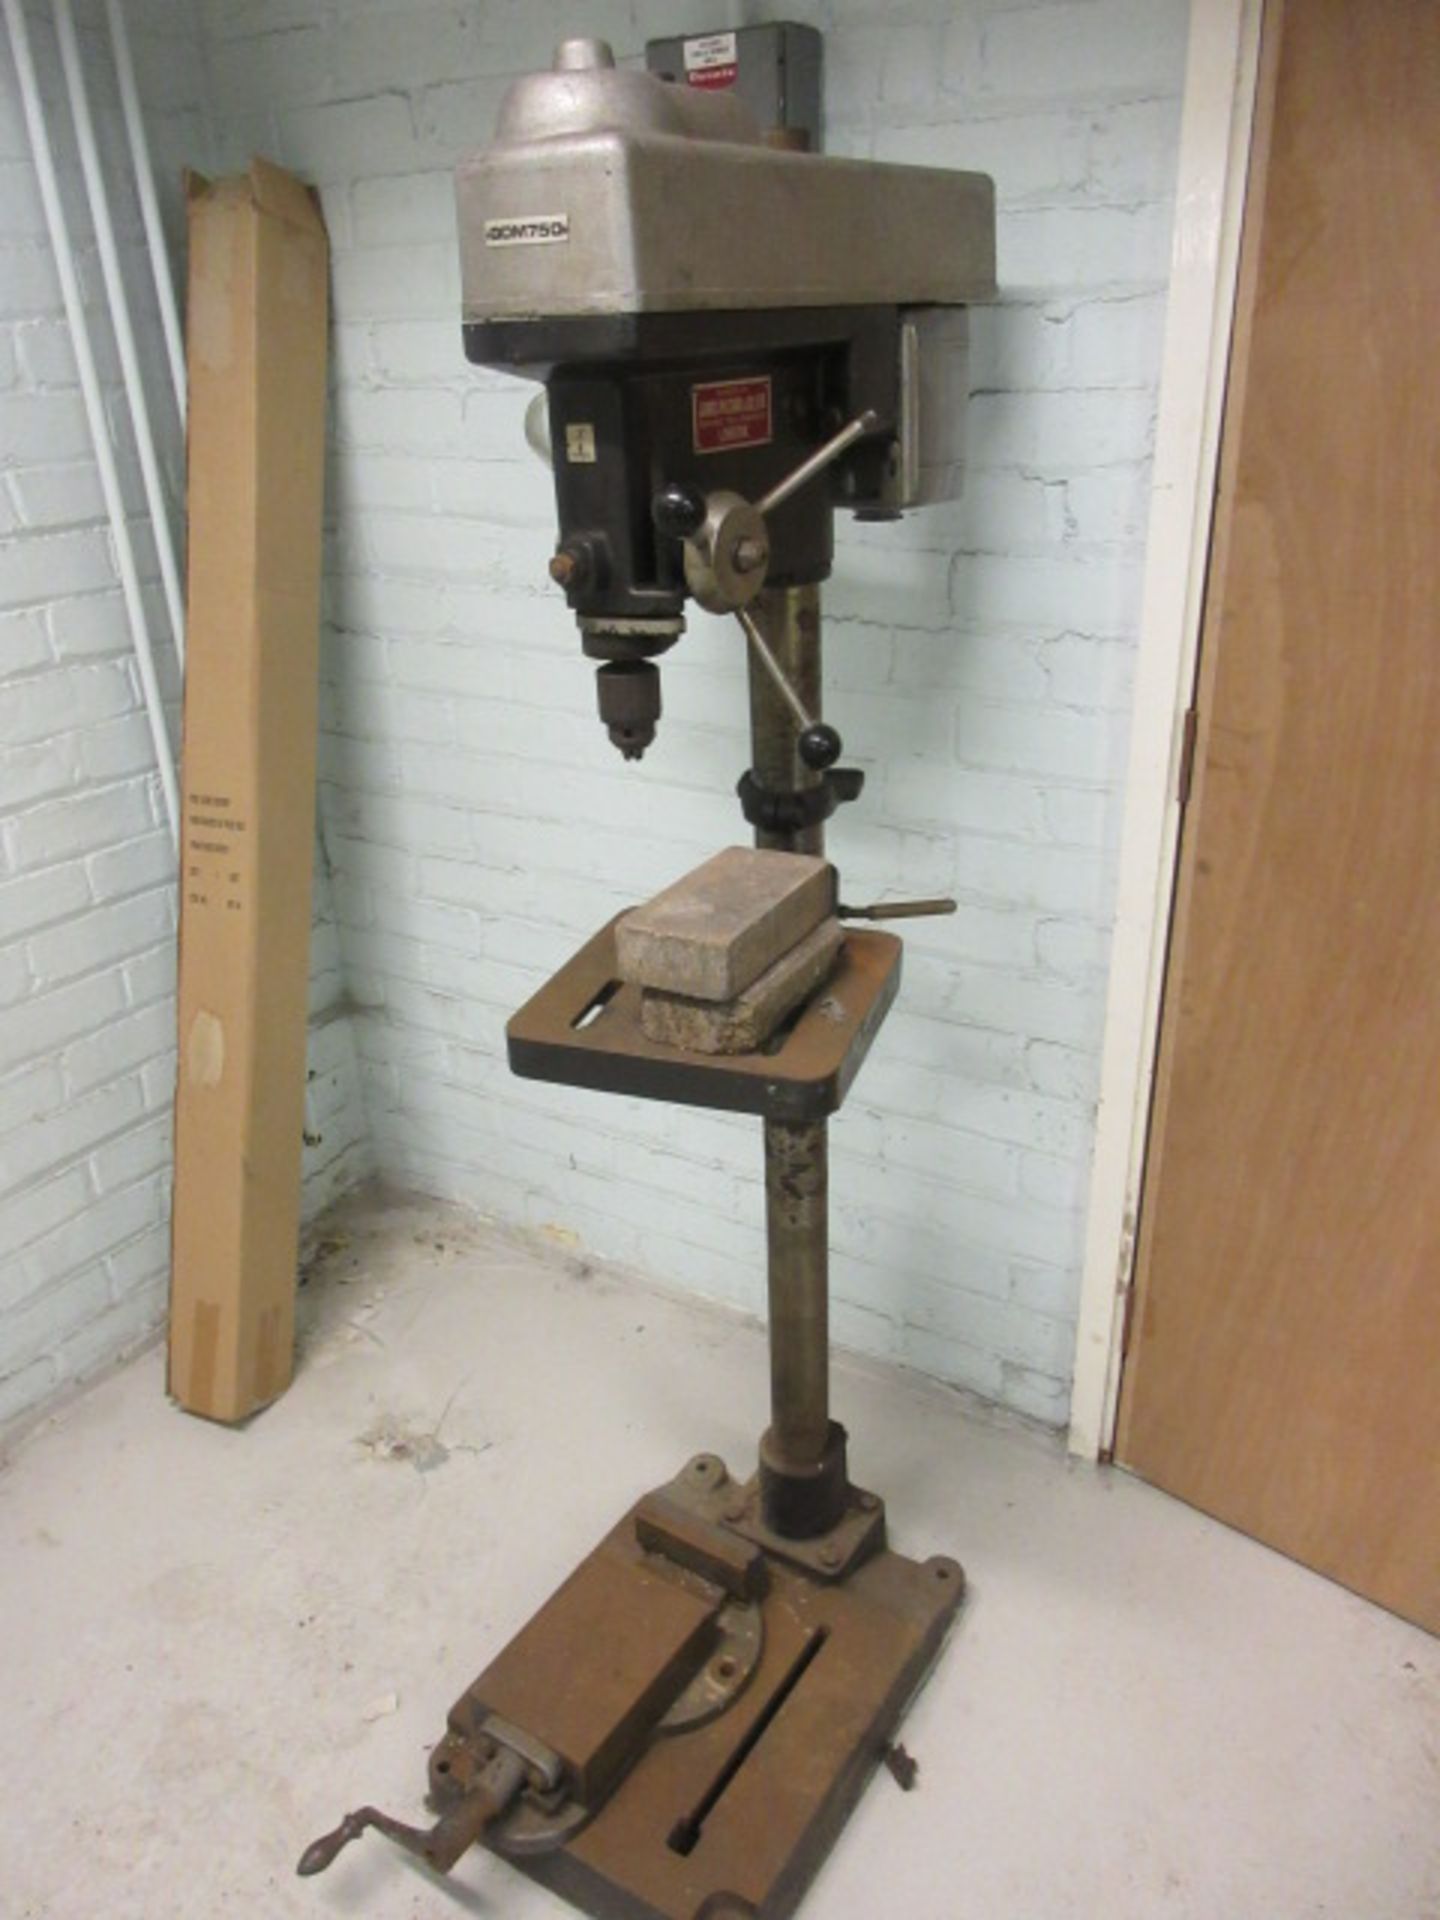 QUARTERS & SMITH QDM750, 3/4 "CAPACITY, 8 SPEED PILLAR DRILL WITH RISE & FALL TABLE MACHINE VICE. SN